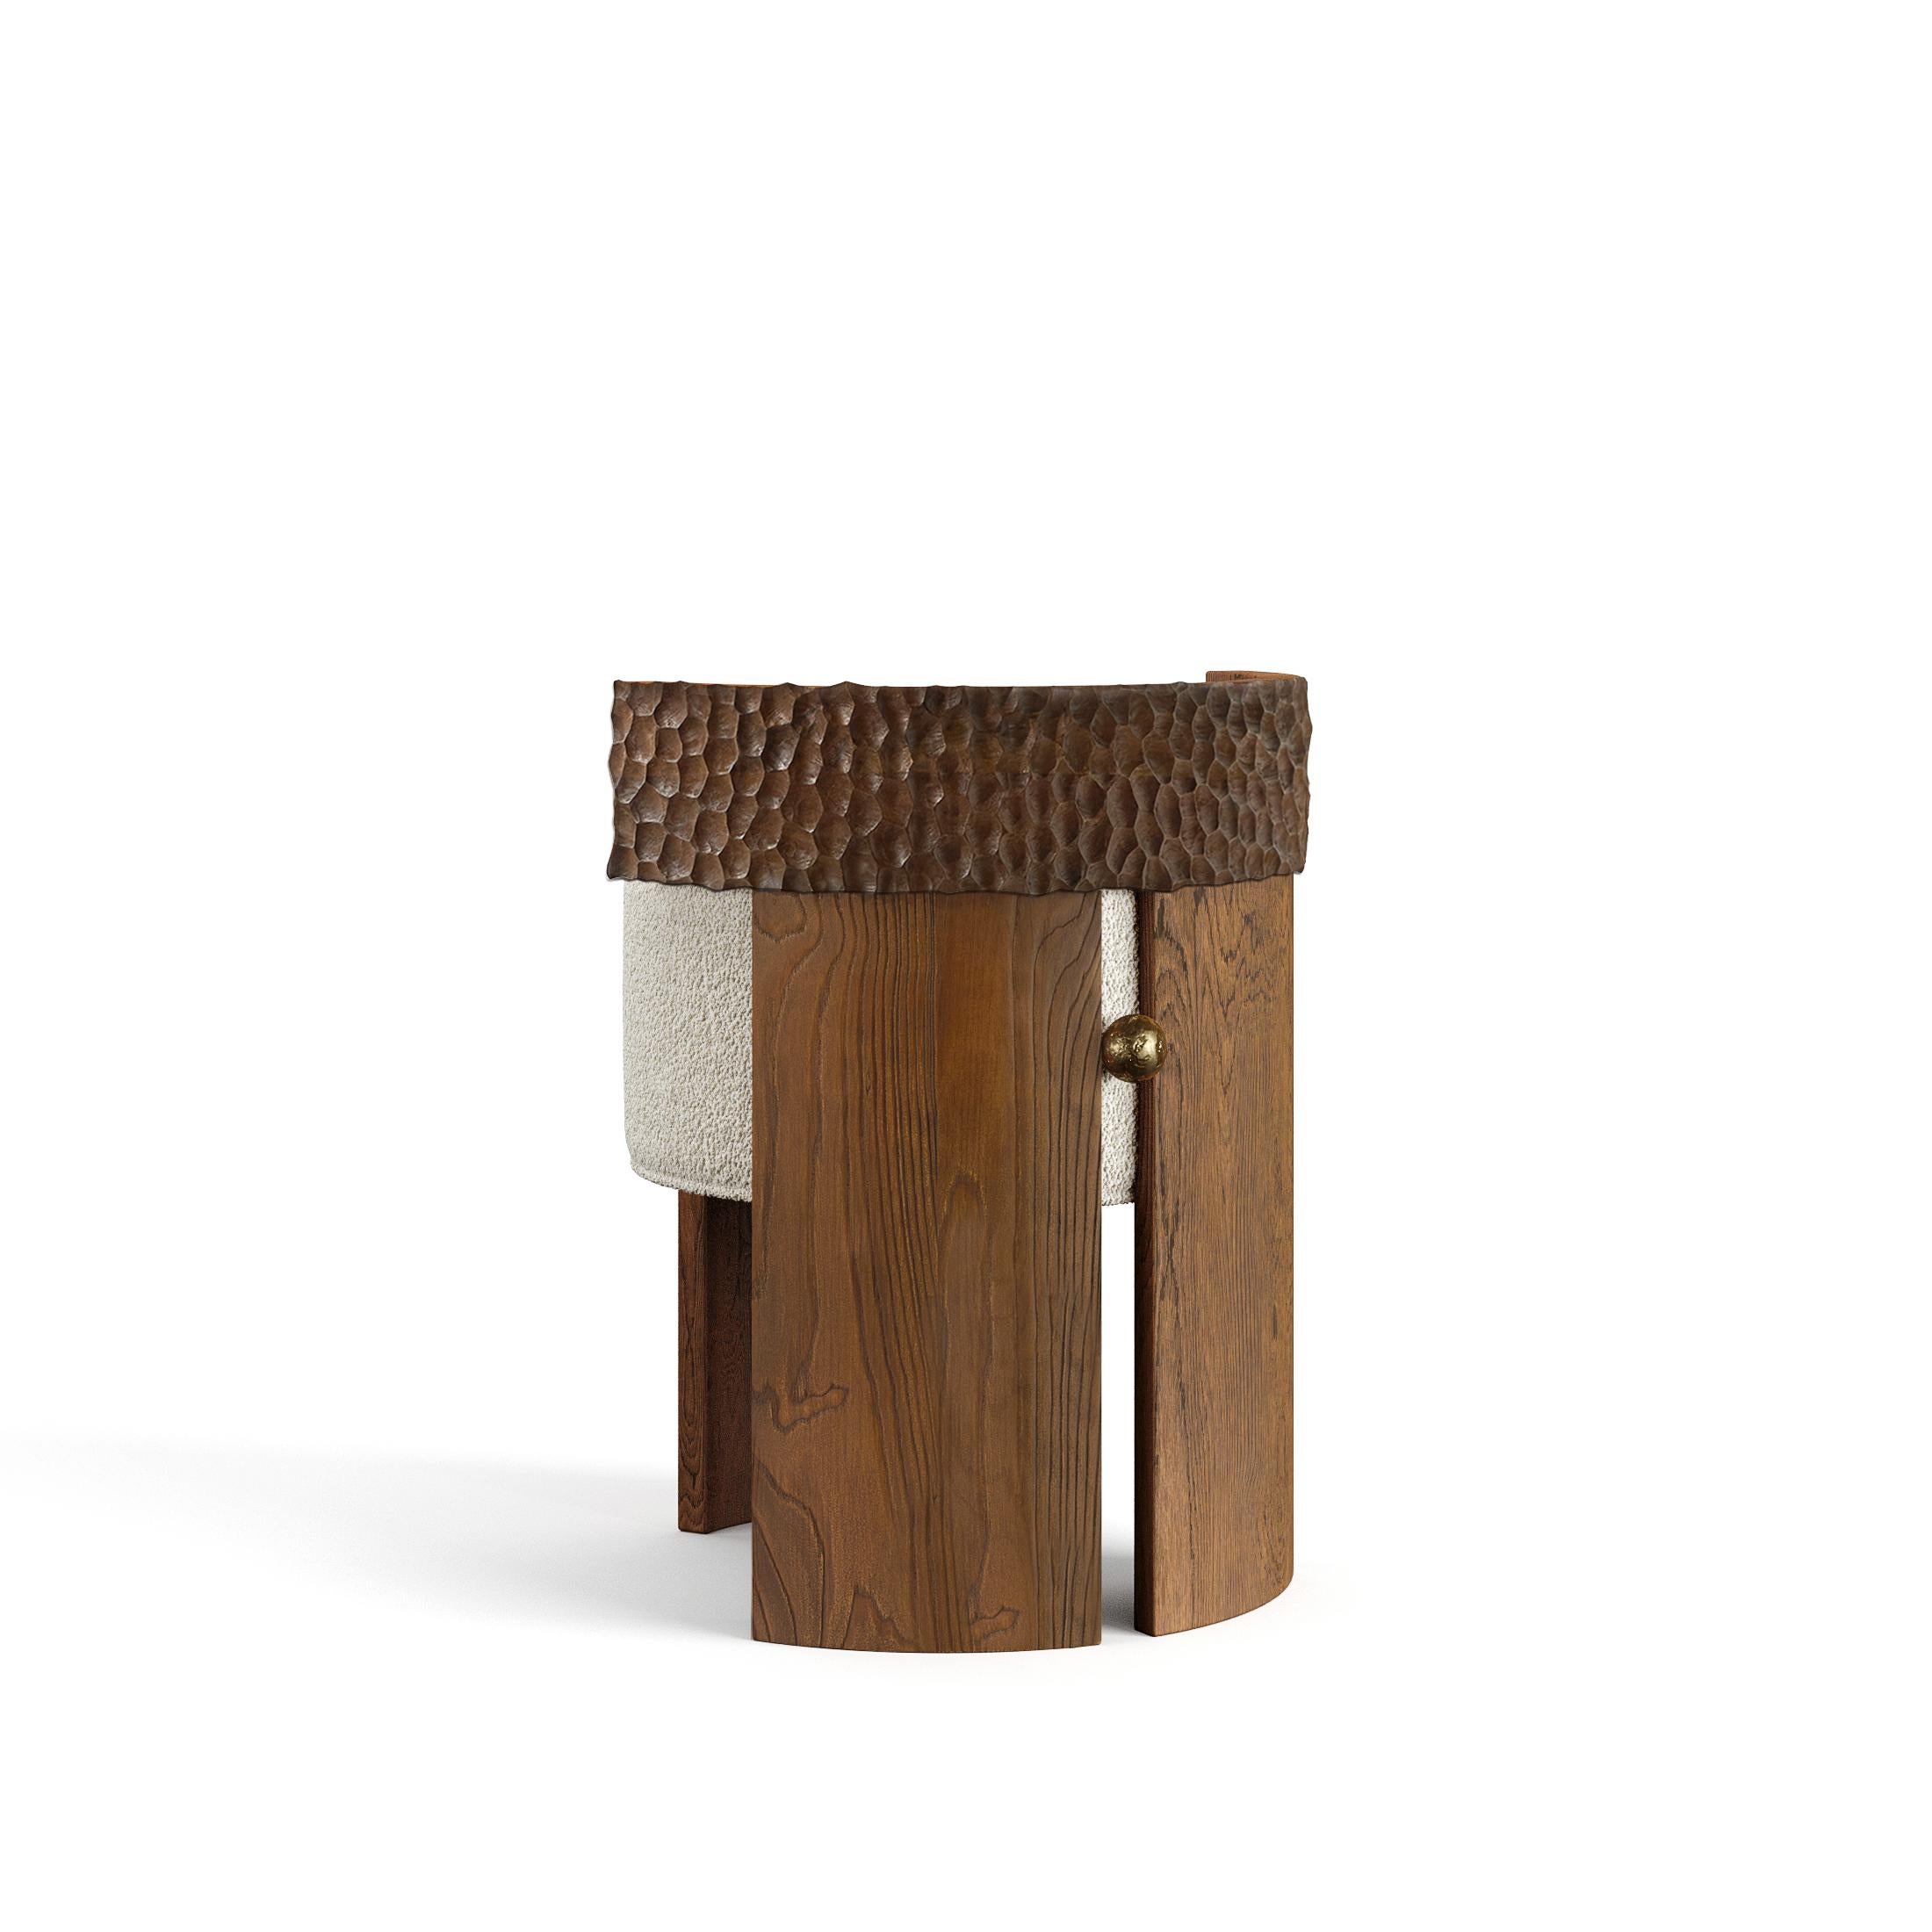 The Yumi Stool is a handcrafted piece of furniture that combines solid wood and liquid bronze for a unique appearance. The stool is made using traditional techniques such as hand carving and casting, ensuring that each piece is one-of-a-kind that